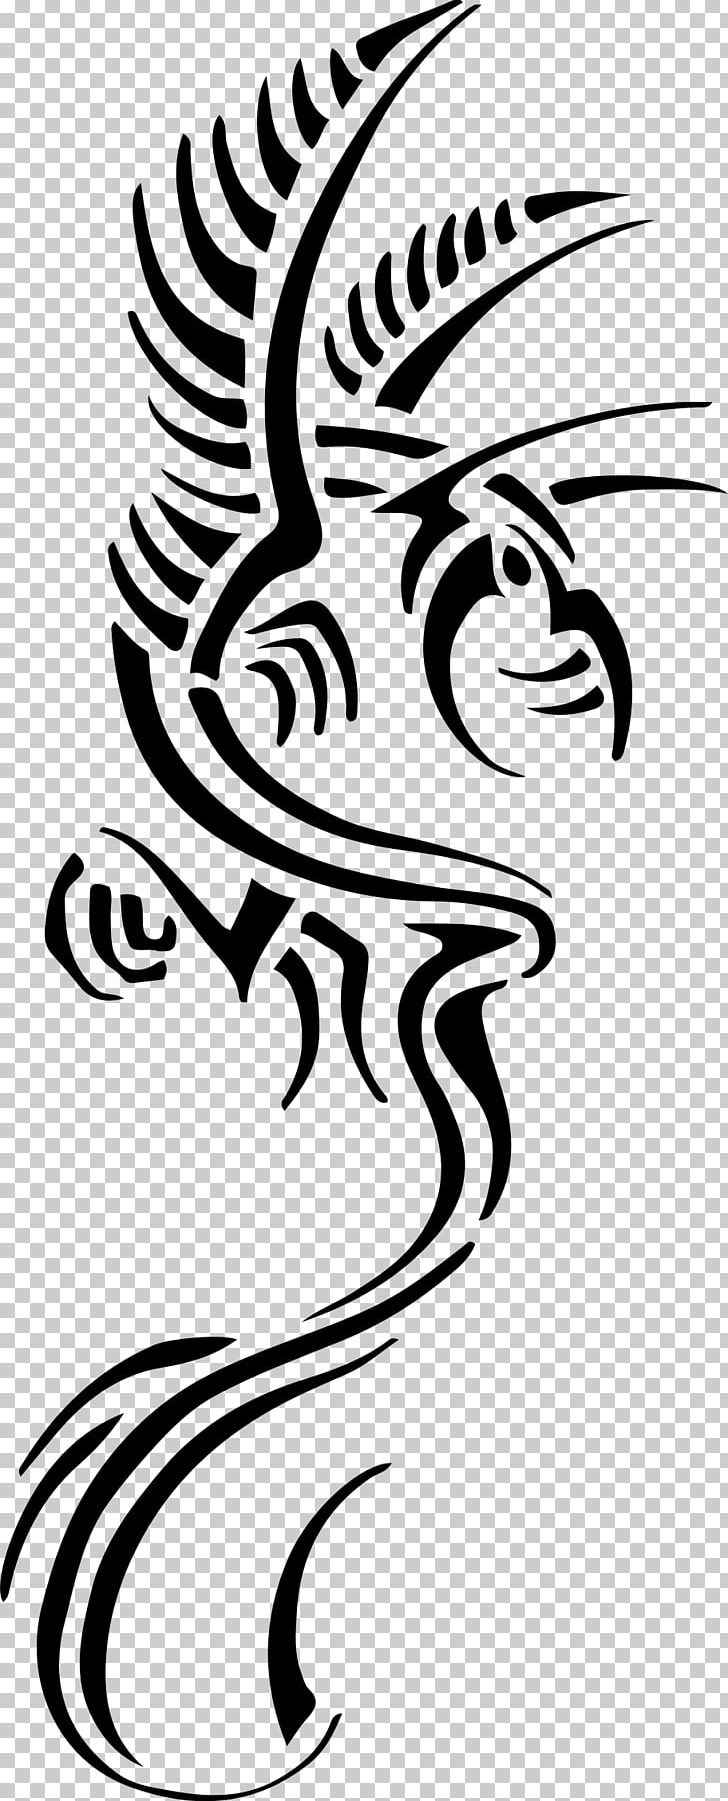 Dragon Legendary Creature Tattoo PNG, Clipart, Art, Artwork, Black, Black And White, Chinese Dragon Free PNG Download